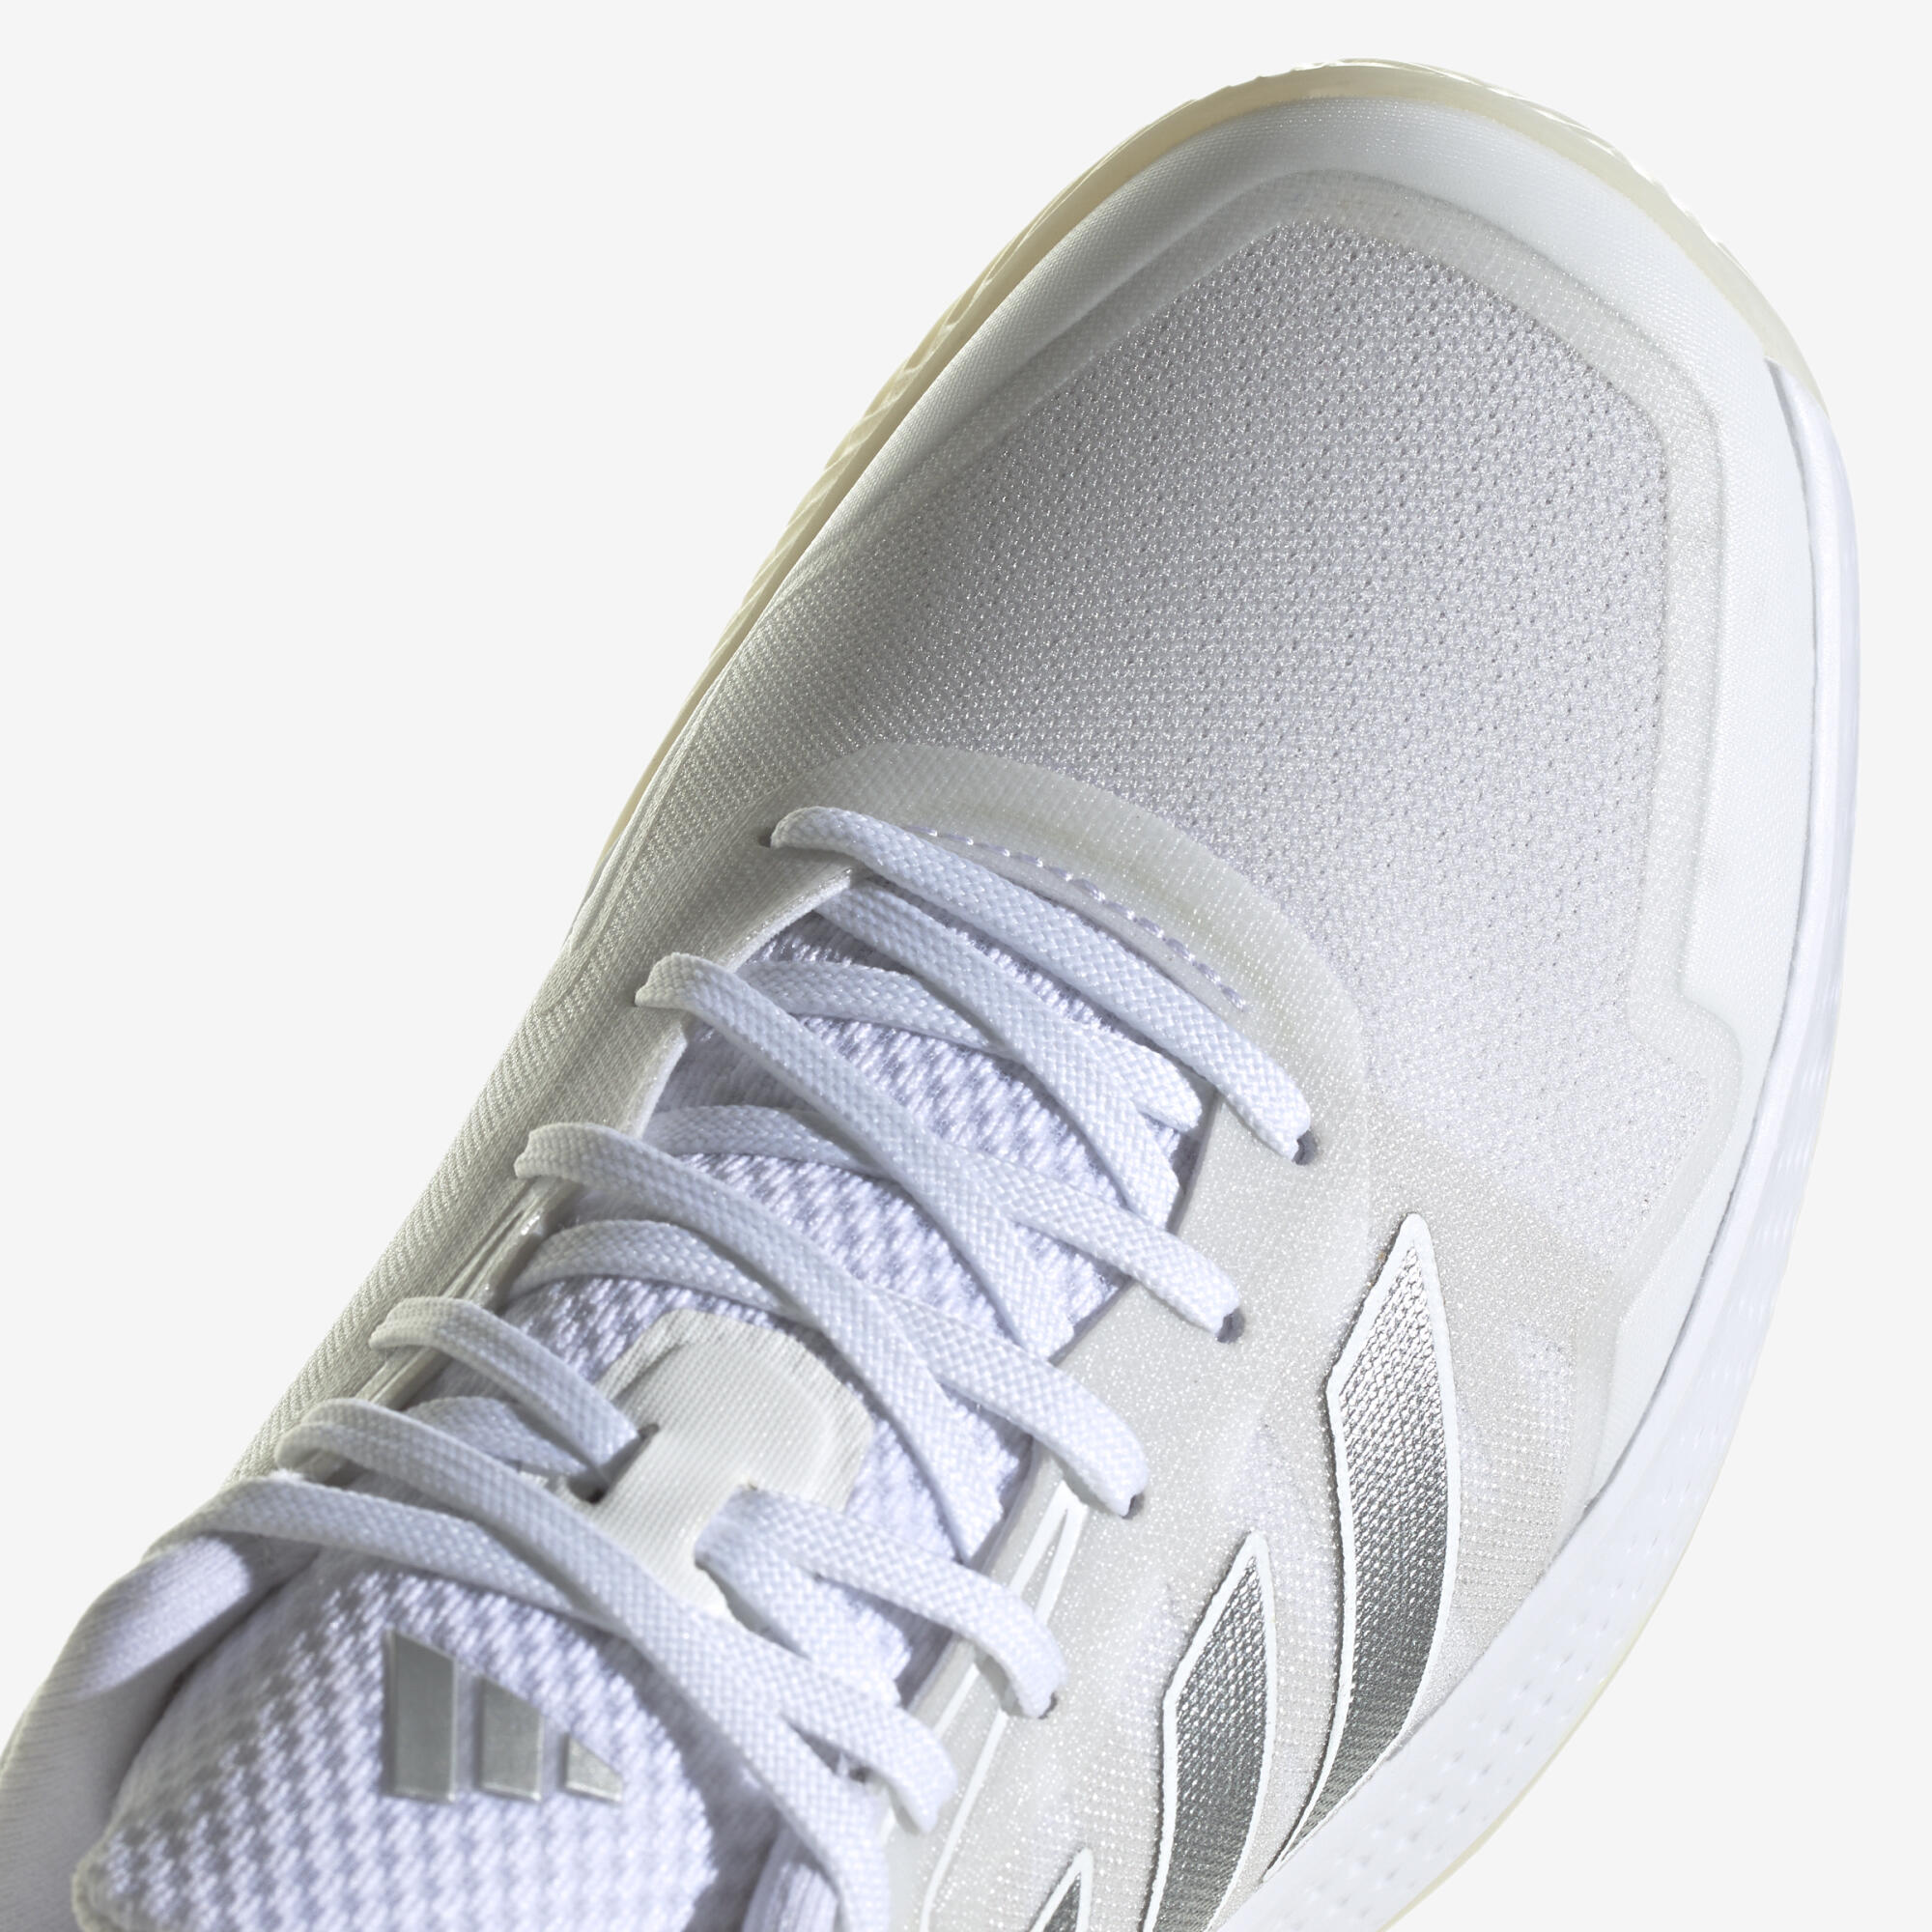 Women's Clay Court Tennis Shoes Defiant Speed - White/Silver 8/8